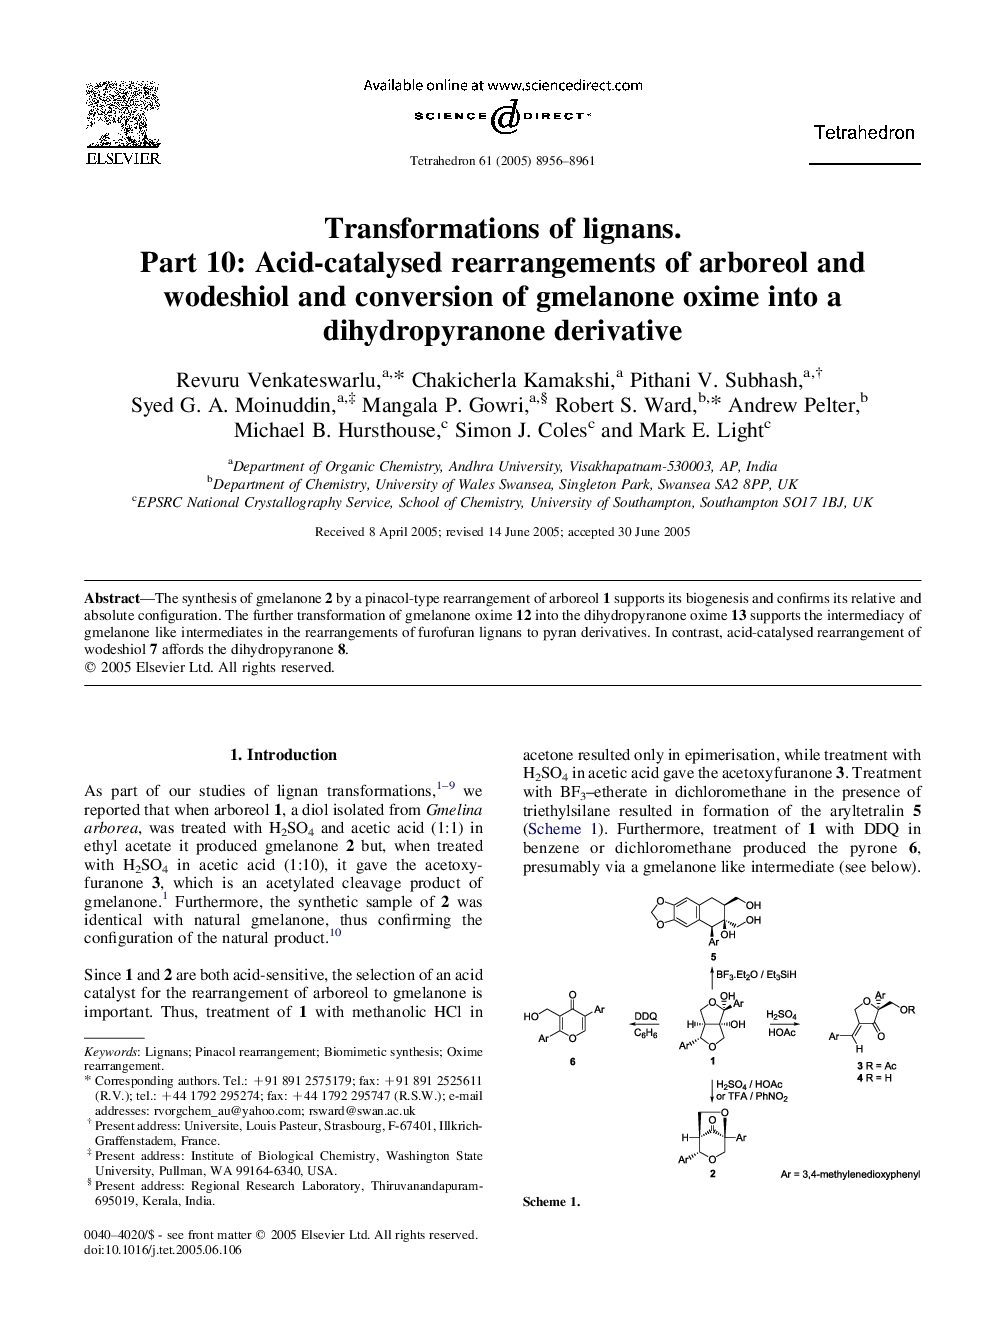 Transformations of lignans. Part 10: Acid-catalysed rearrangements of arboreol and wodeshiol and conversion of gmelanone oxime into a dihydropyranone derivative